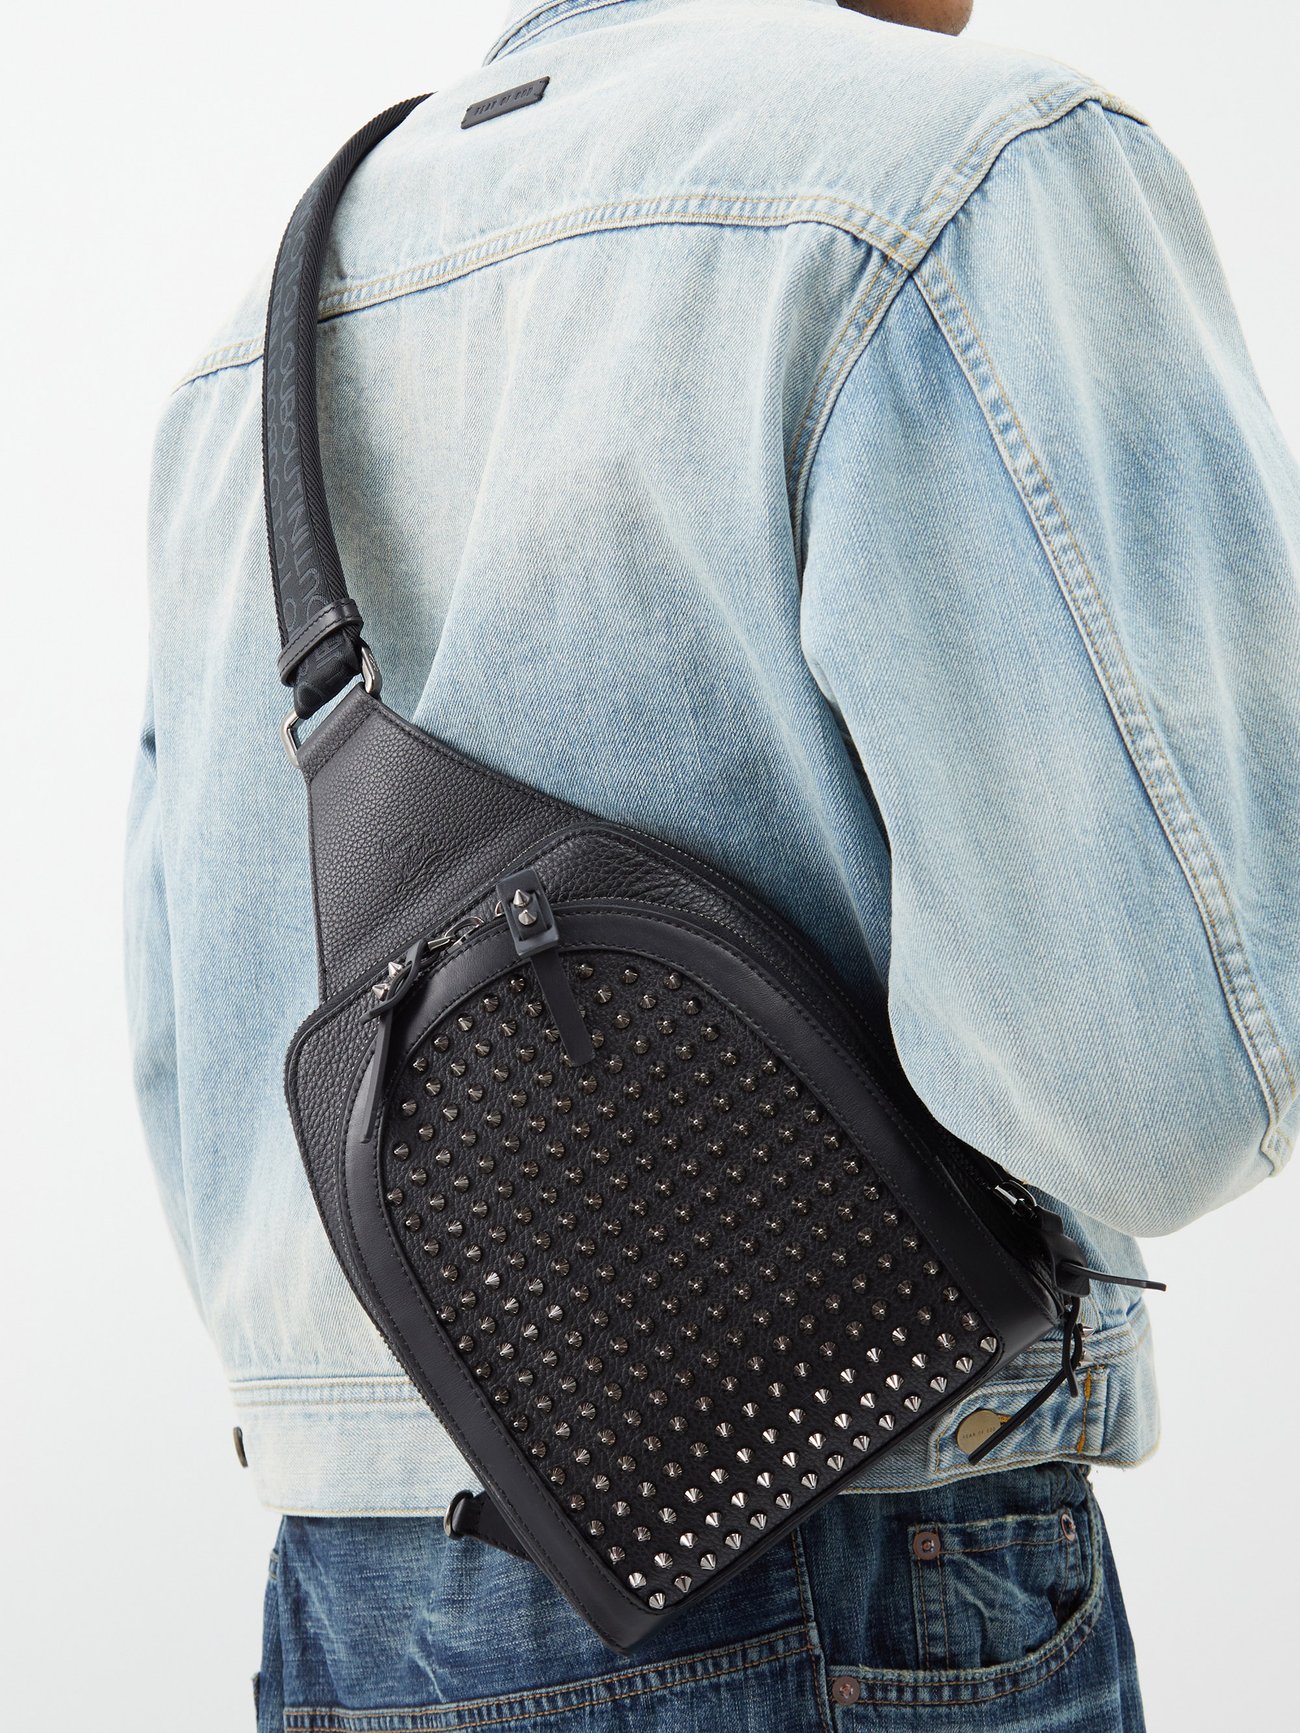 Christian Louboutin Leather Backpack With Studs in Black for Men